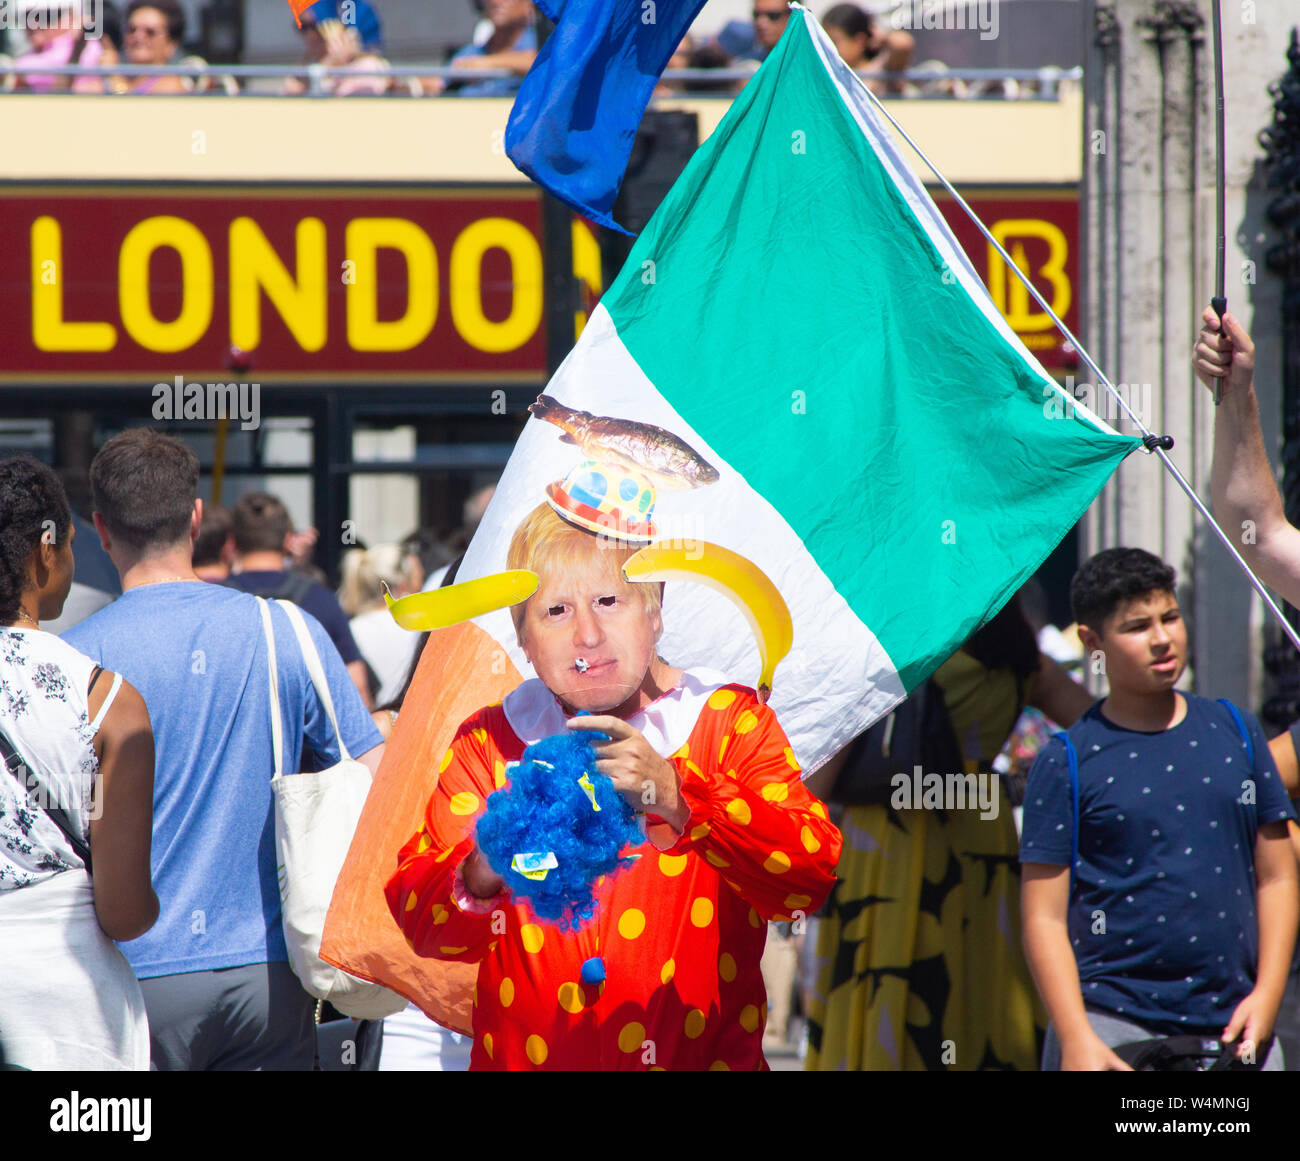 Westminster, London, UK July 24th. Anti Brexit and Pro Leave campaigners and those against  Boris Johnson, the new Prime Minister, express their views ahead of the resignation of Prime Minister Theresa May, and the appointment of her successor the Rt Hon Boris Johnson (Prime Minister in waiting). PICTURED: 'The Clown' a regular performer outside of the Houses of Parliament. Credit: Bridget Catterall/Alamy Live News Stock Photo